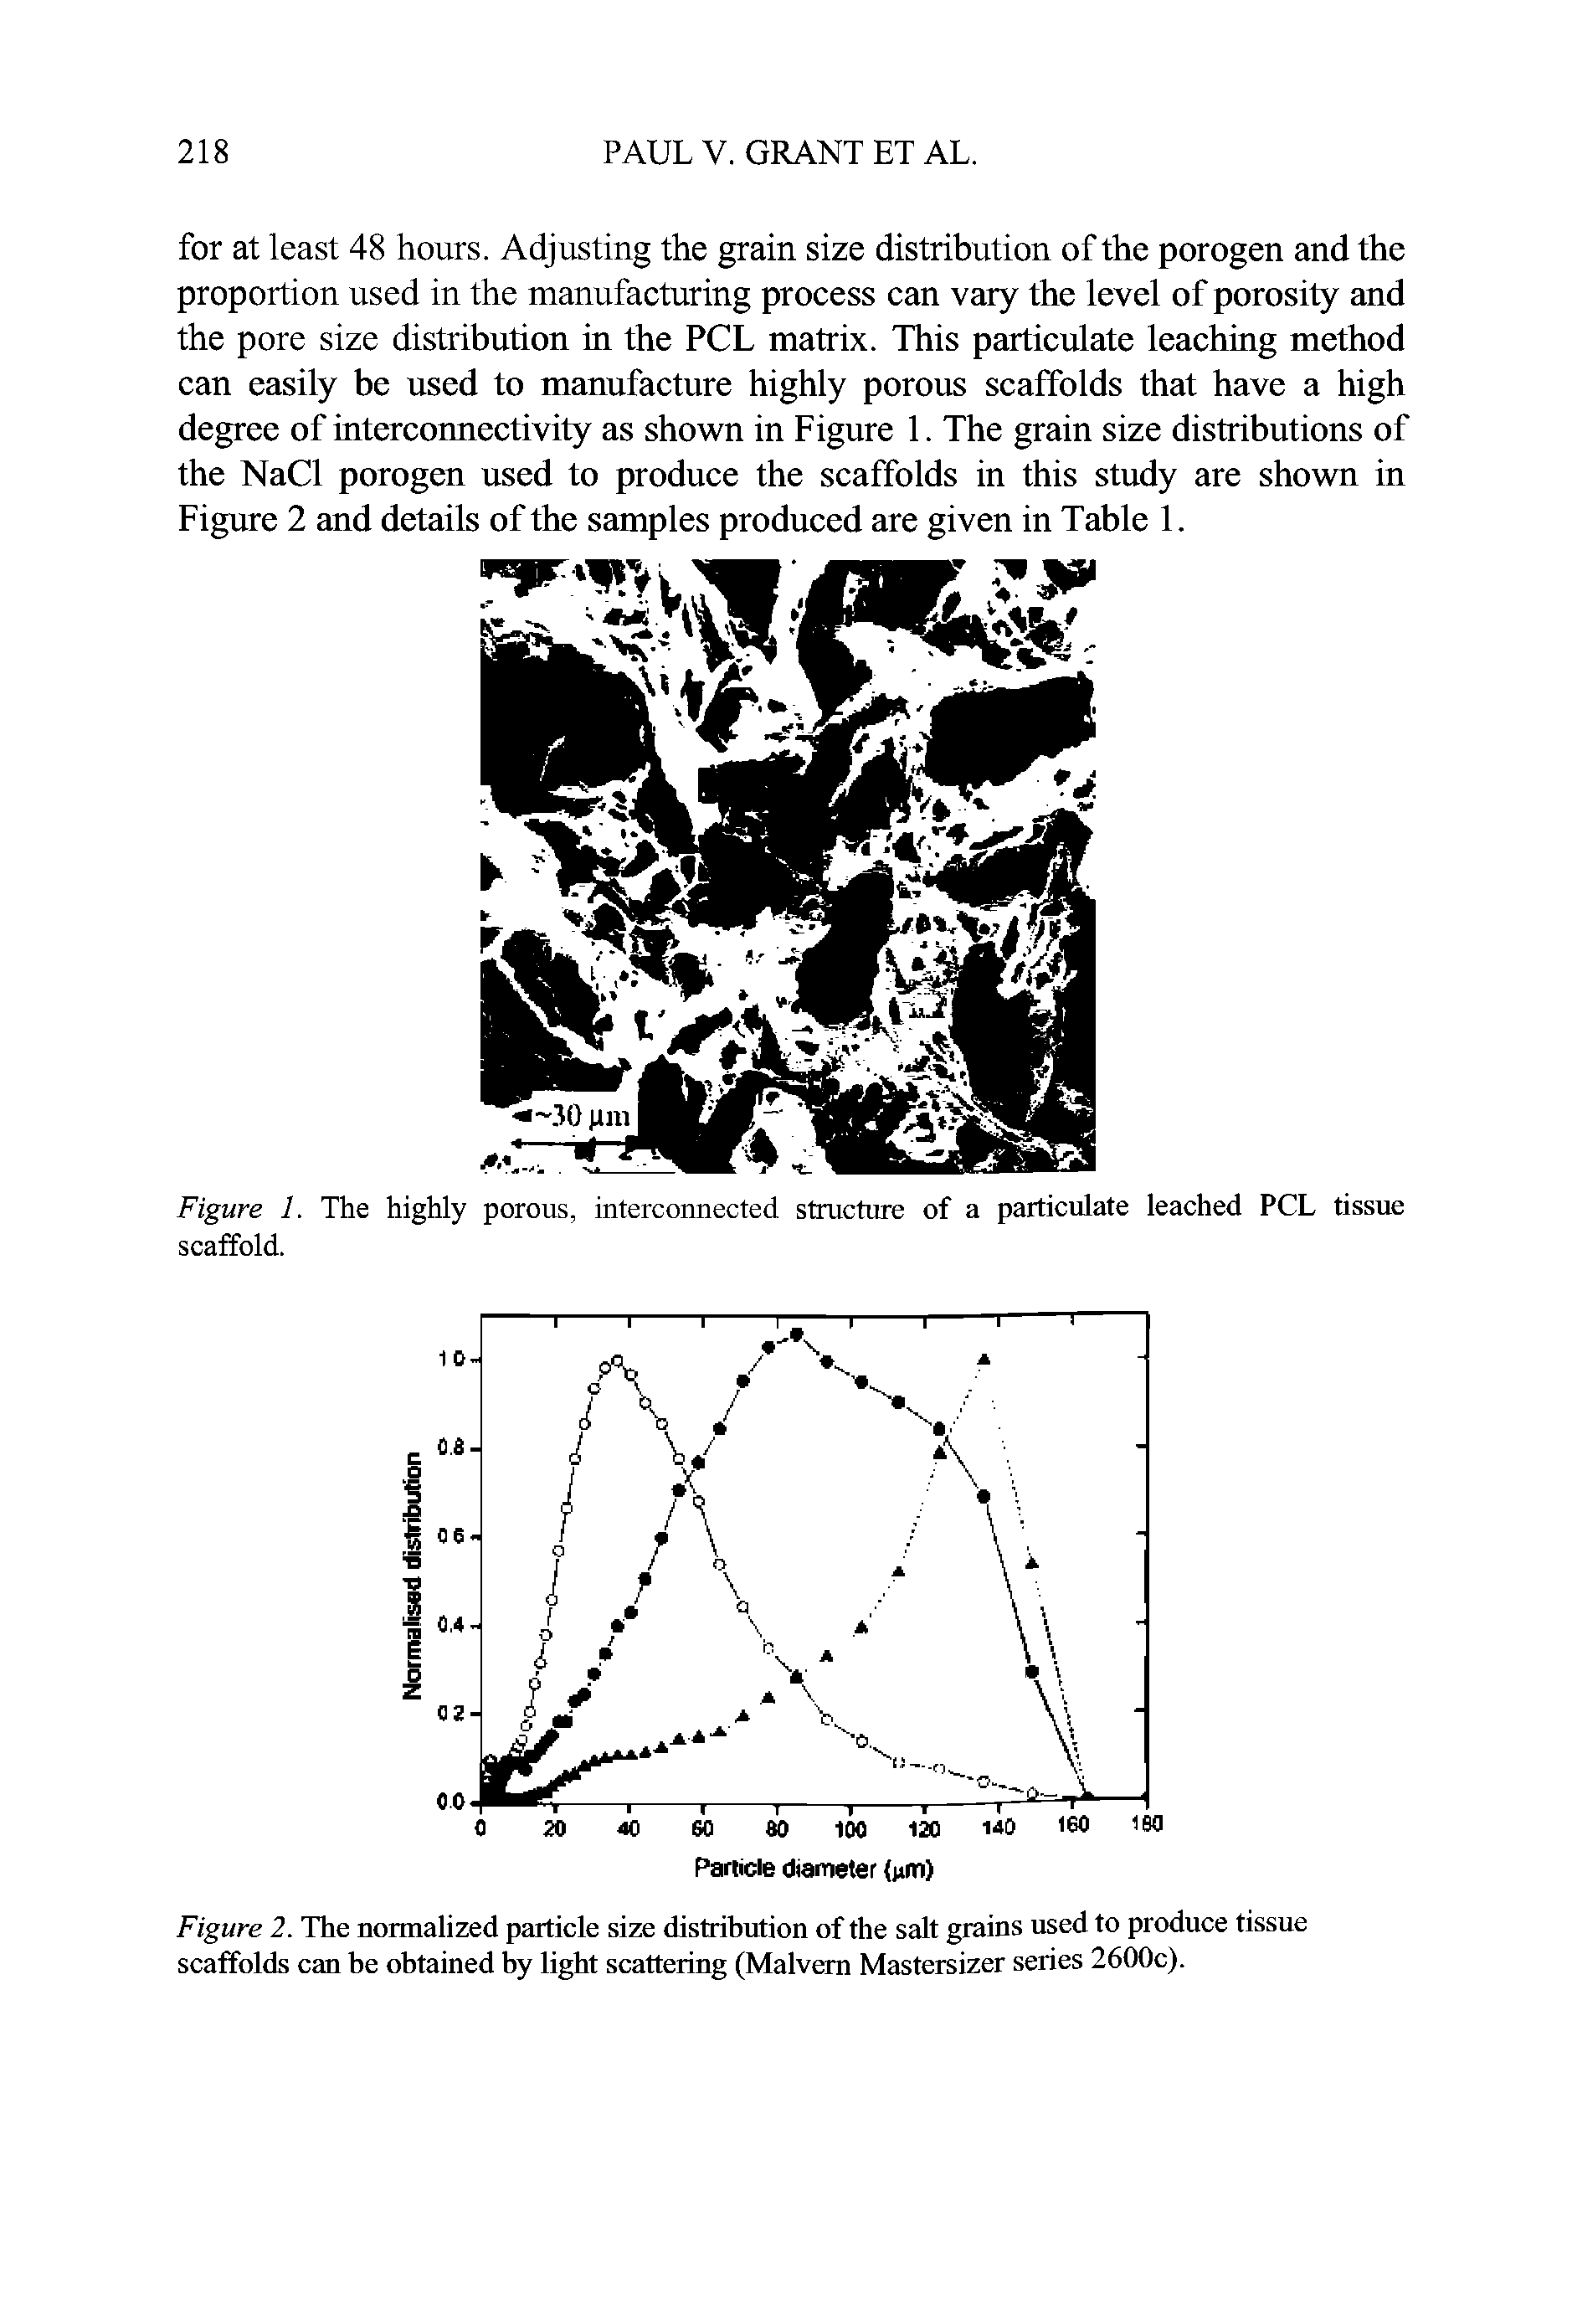 Figure 2. The normalized particle size distribution of the salt grains used to produce tissue scaffolds can be obtained by light scattering (Malvern Mastersizer series 2600c).